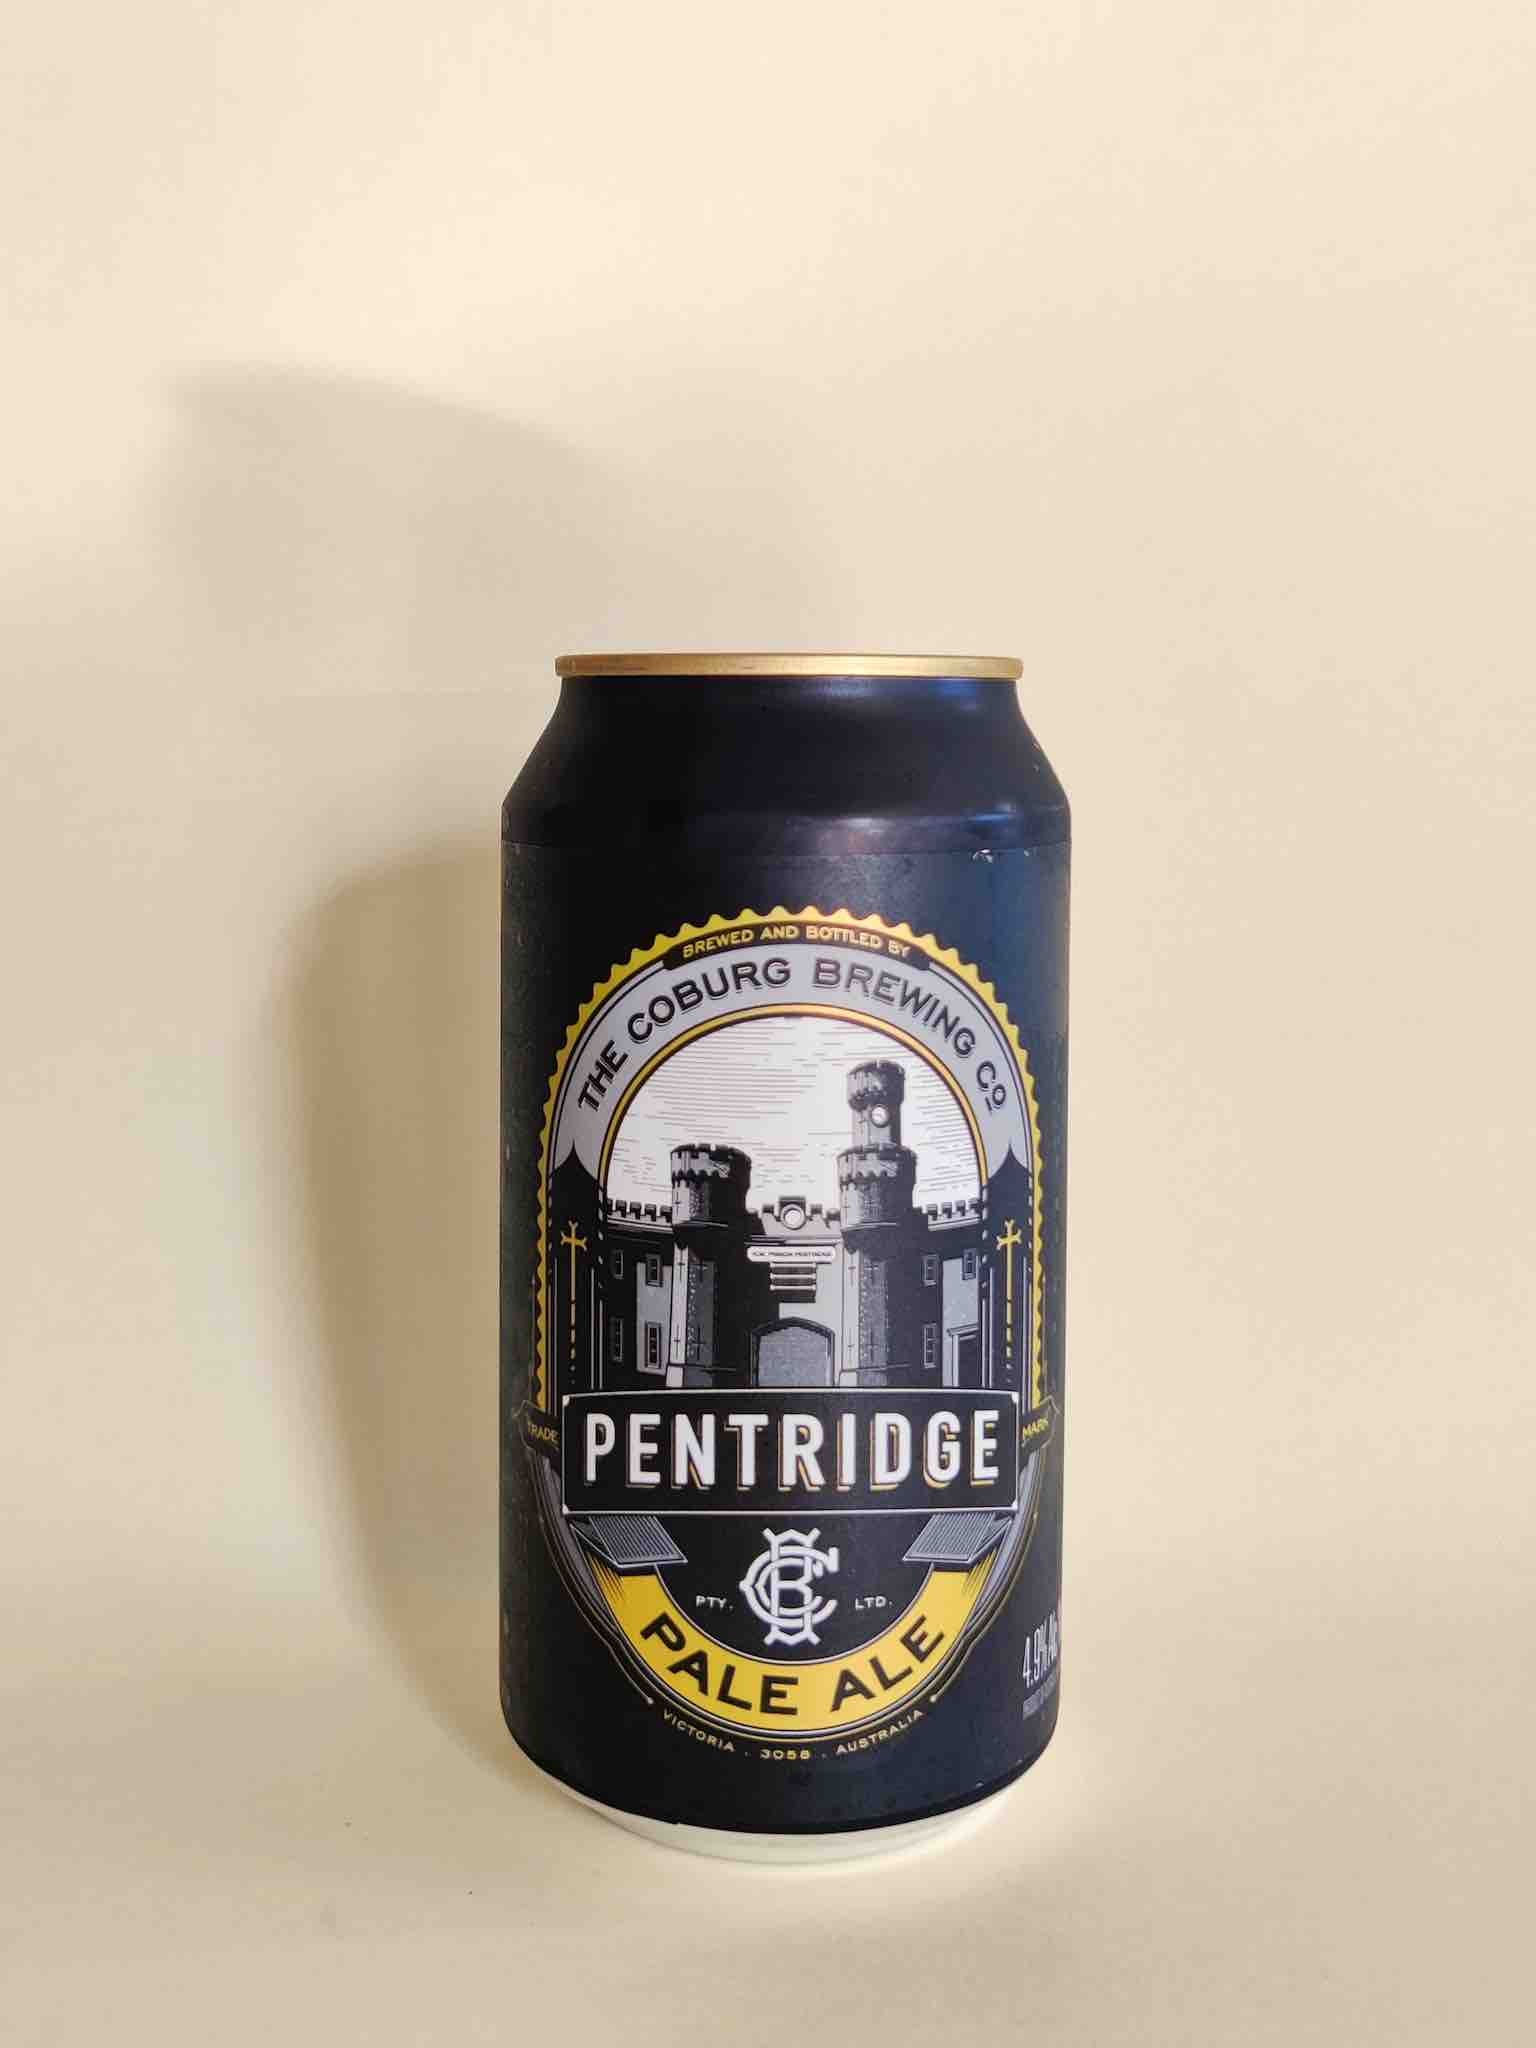 A 375ml can of Pentridge Pale Ale, made by Coburg Brewing Co. 